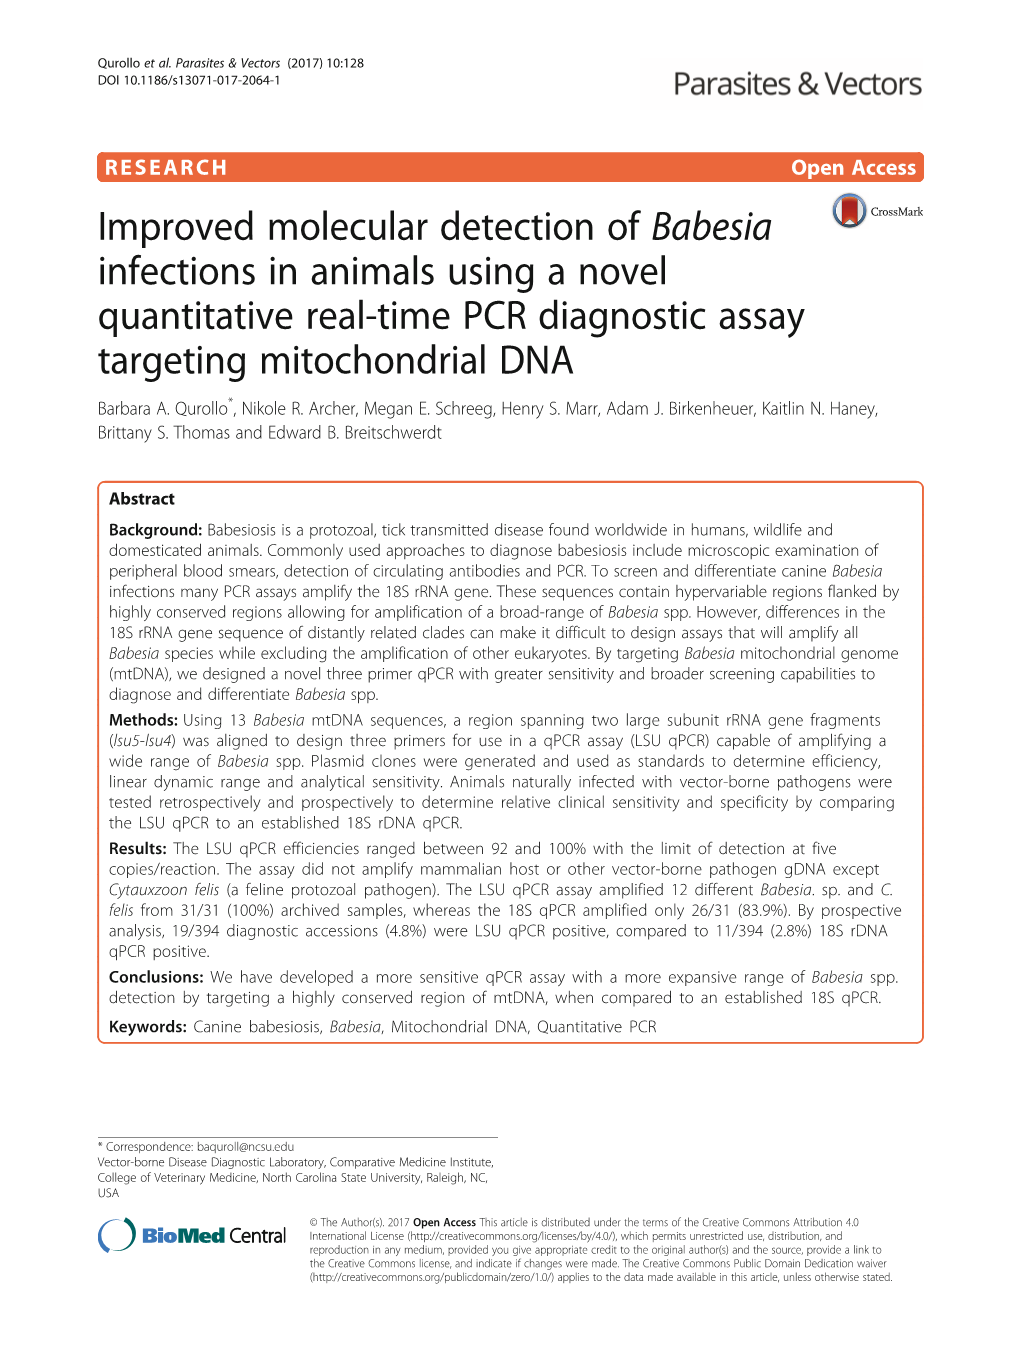 Improved Molecular Detection of Babesia Infections in Animals Using a Novel Quantitative Real-Time PCR Diagnostic Assay Targeting Mitochondrial DNA Barbara A